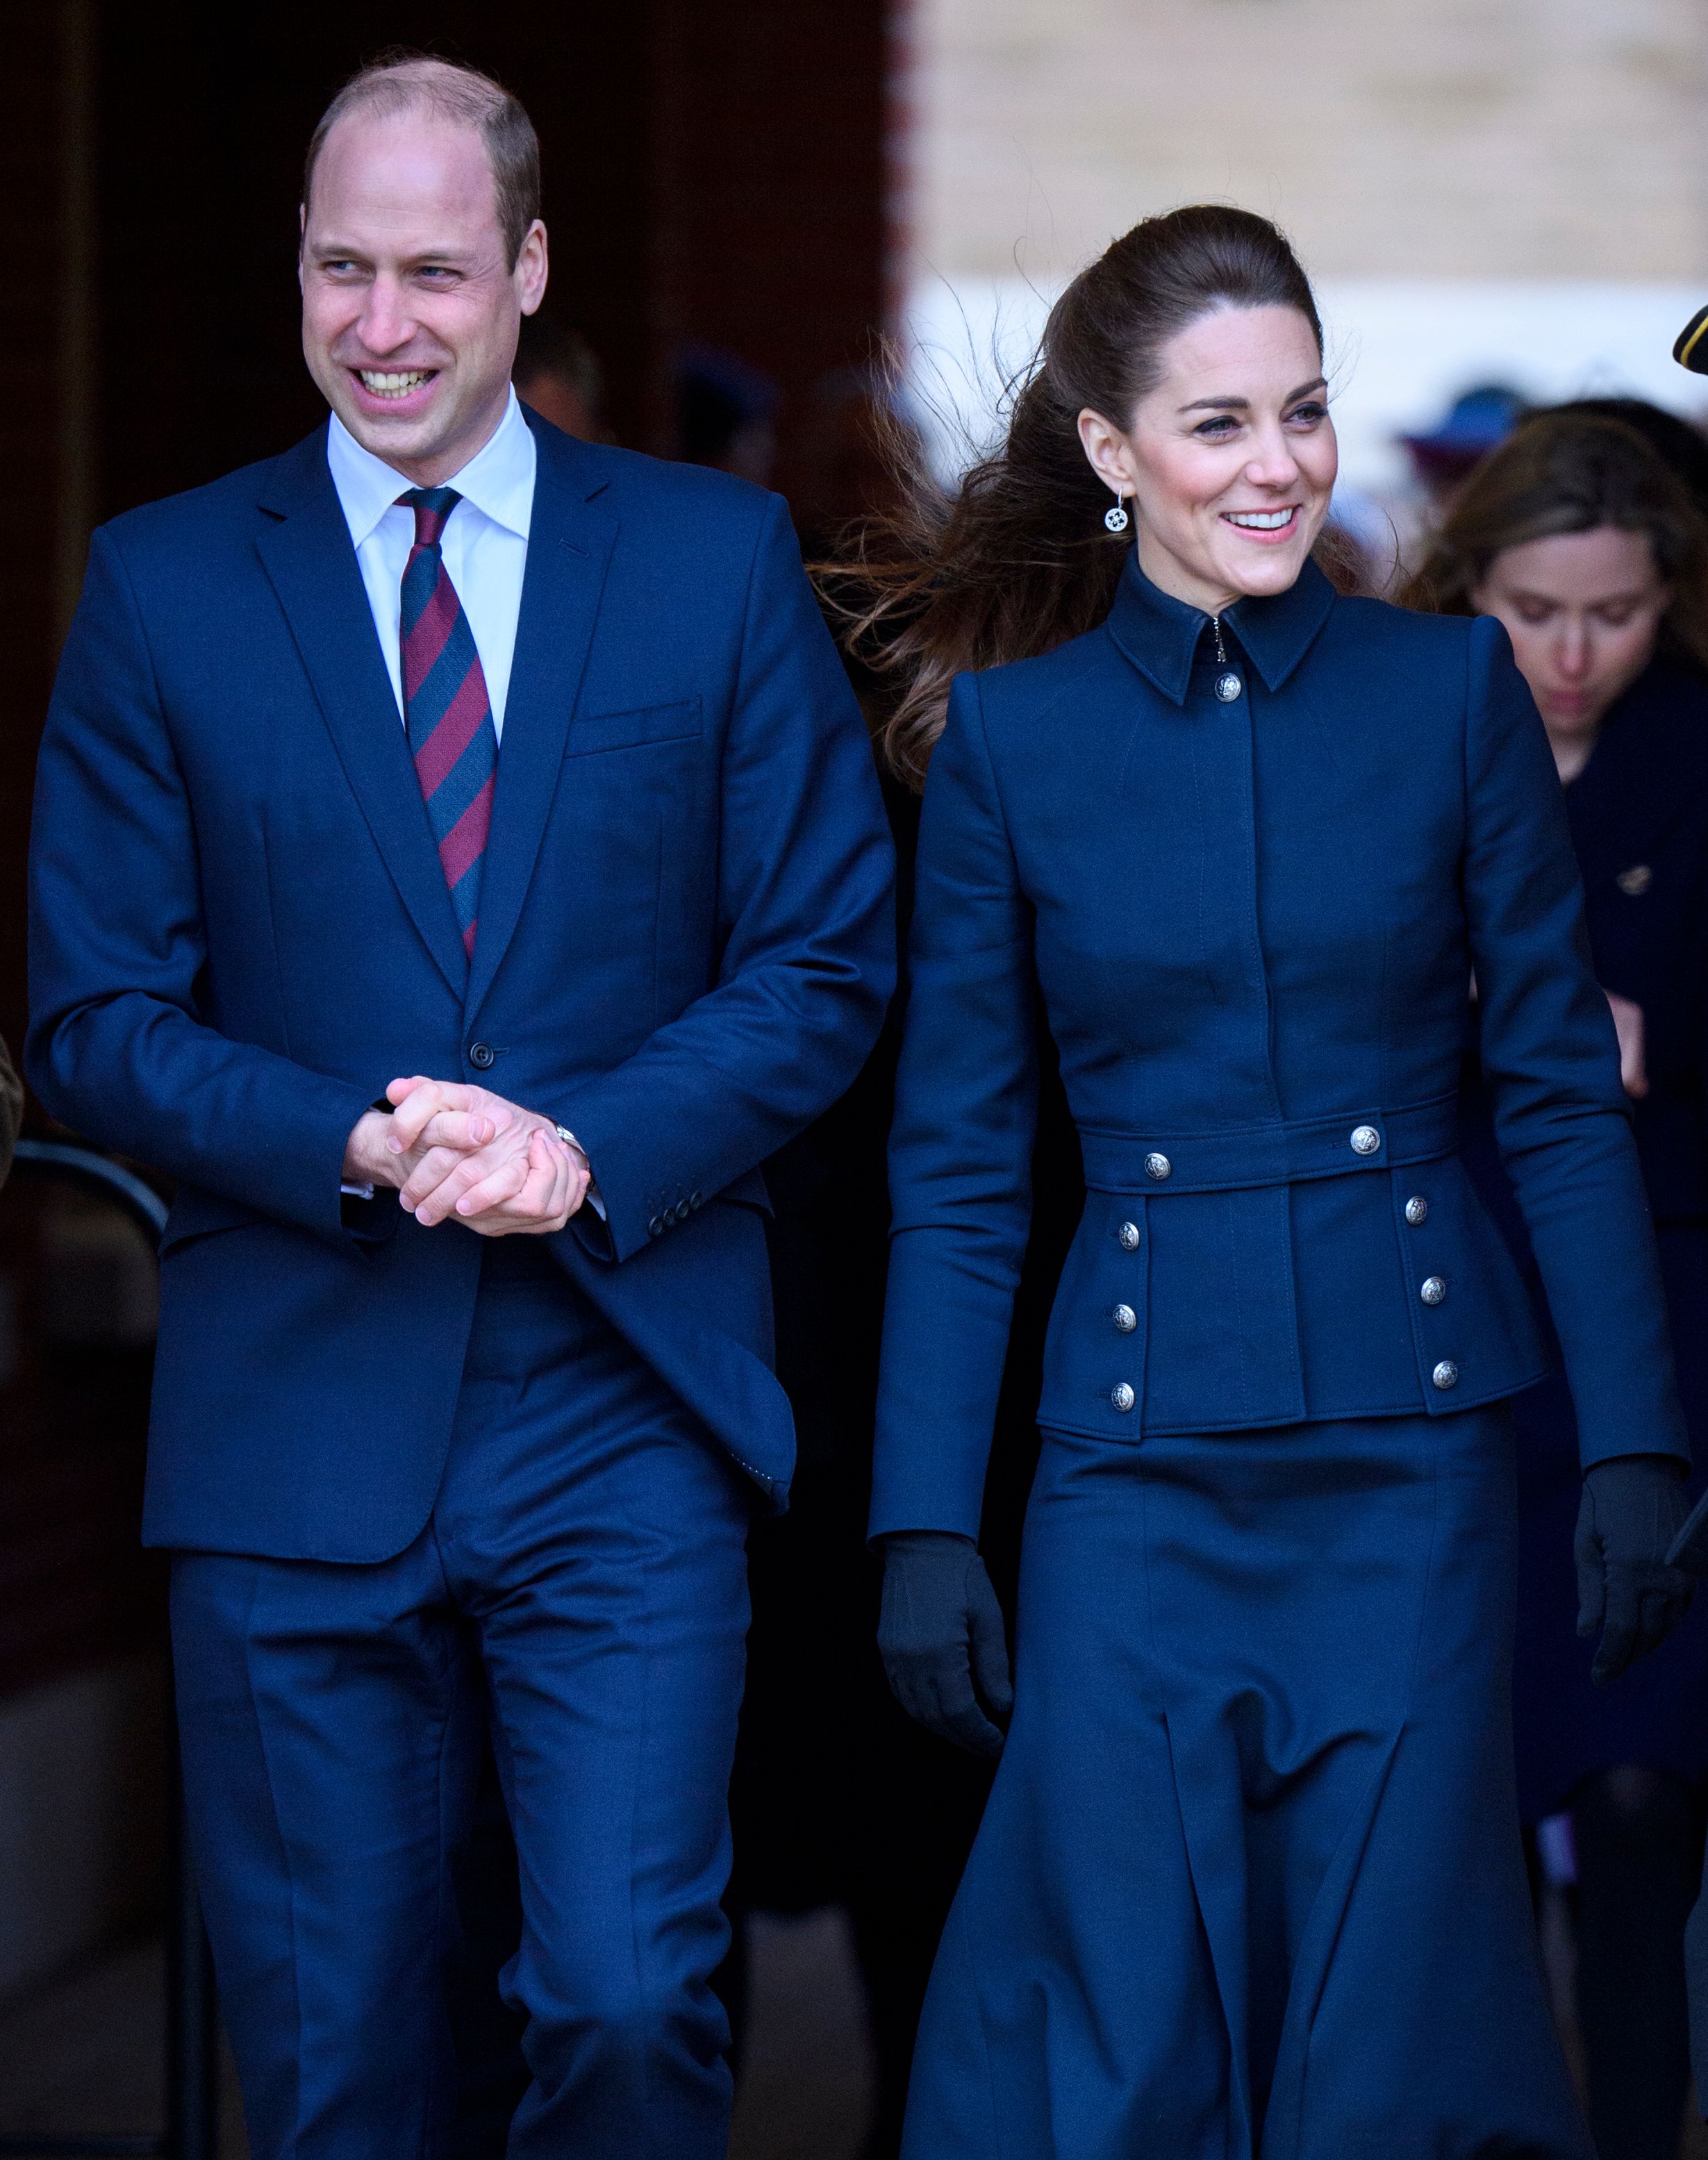 Prince William And Kate Middleton To Take Break To Hang With Kids